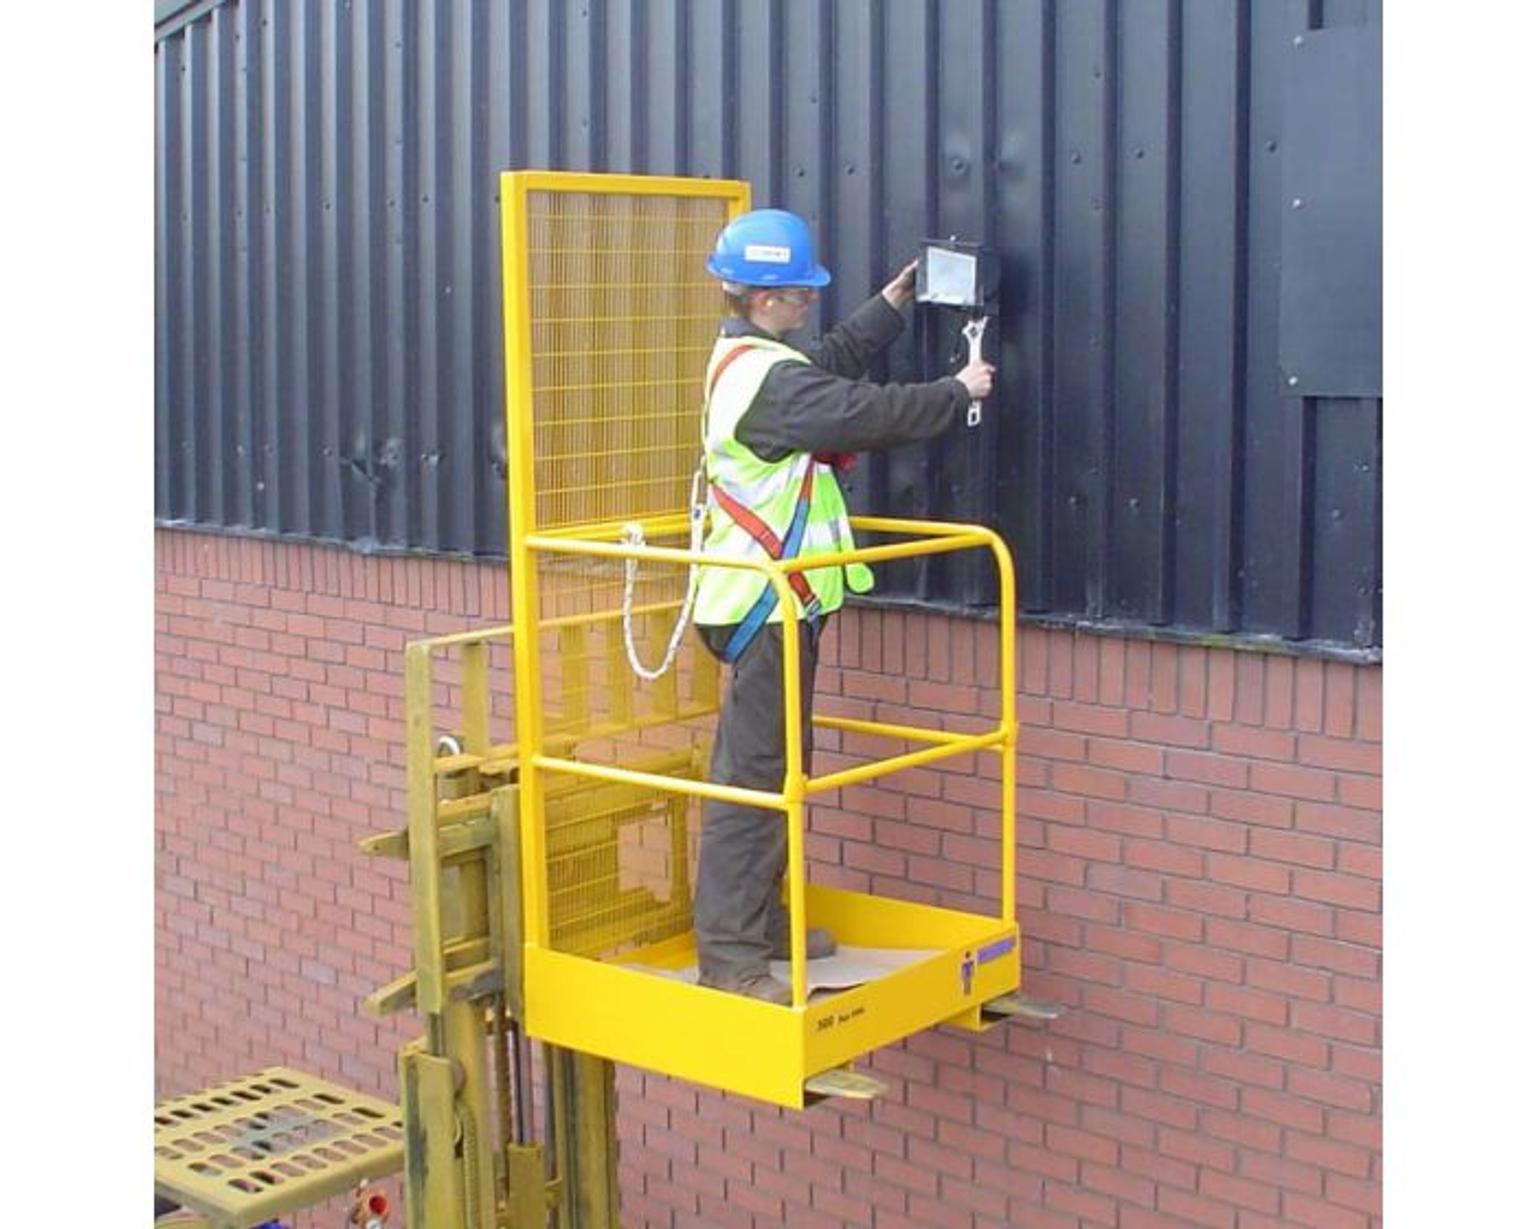 Access Platform Forklift Cage Attachment In B97 Redditch For 662 45 For Sale Shpock